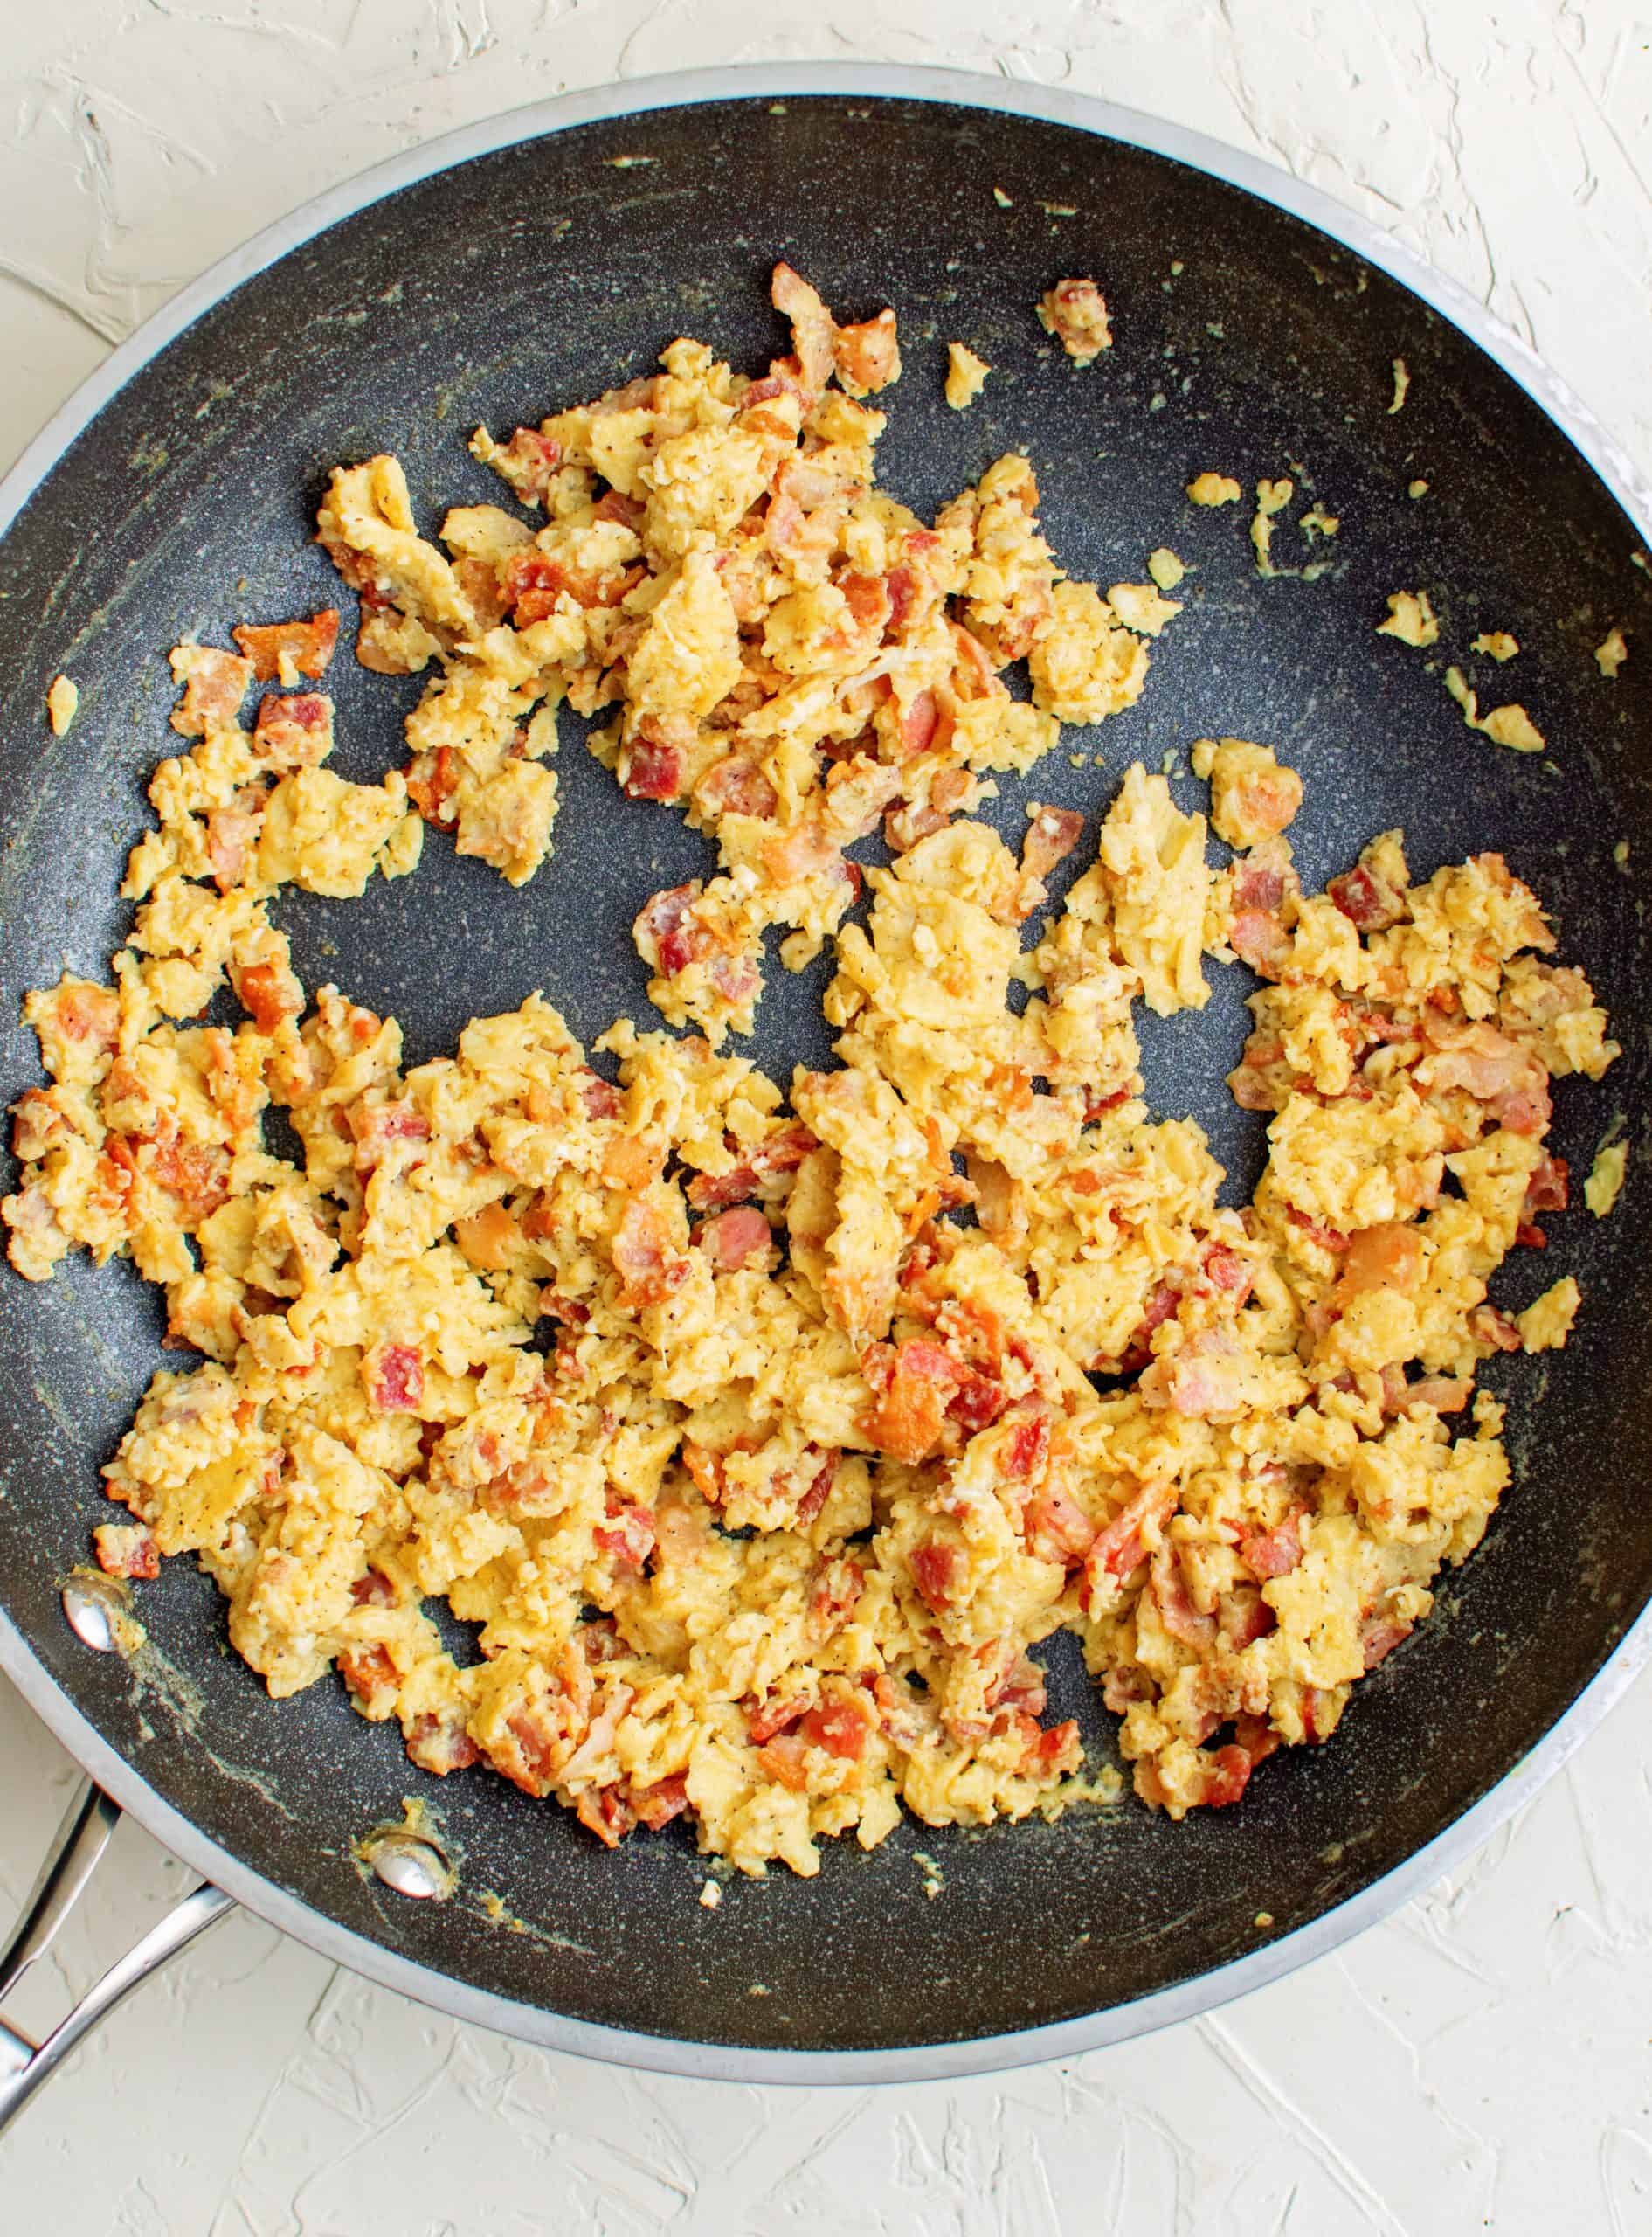 Bacon and eggs cooked in pan.